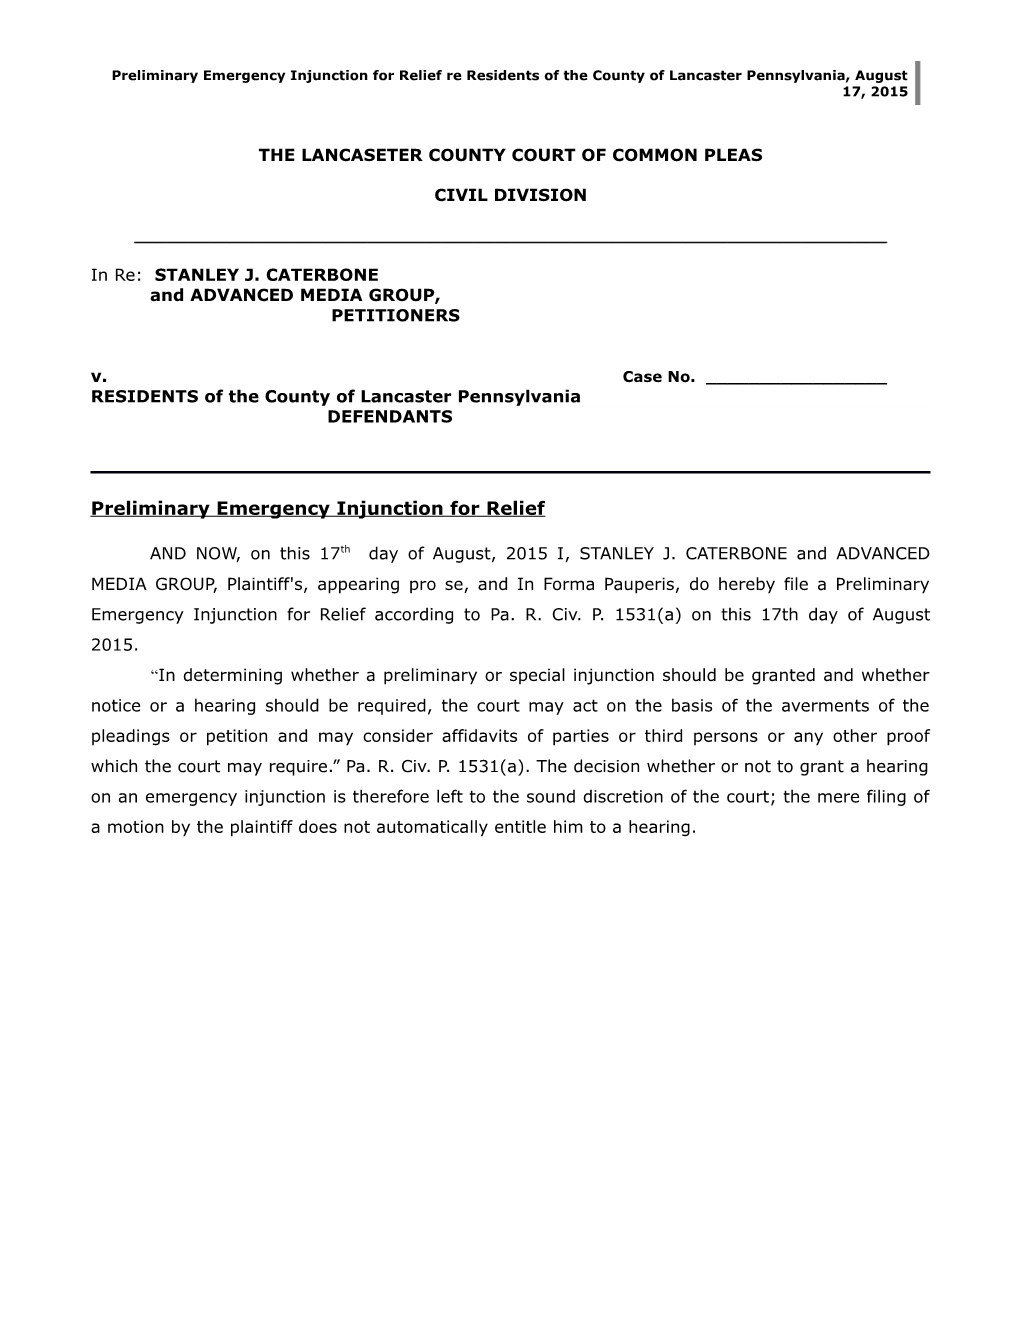 Preliminary Emergency Injunction for Relief, October 28, 2009